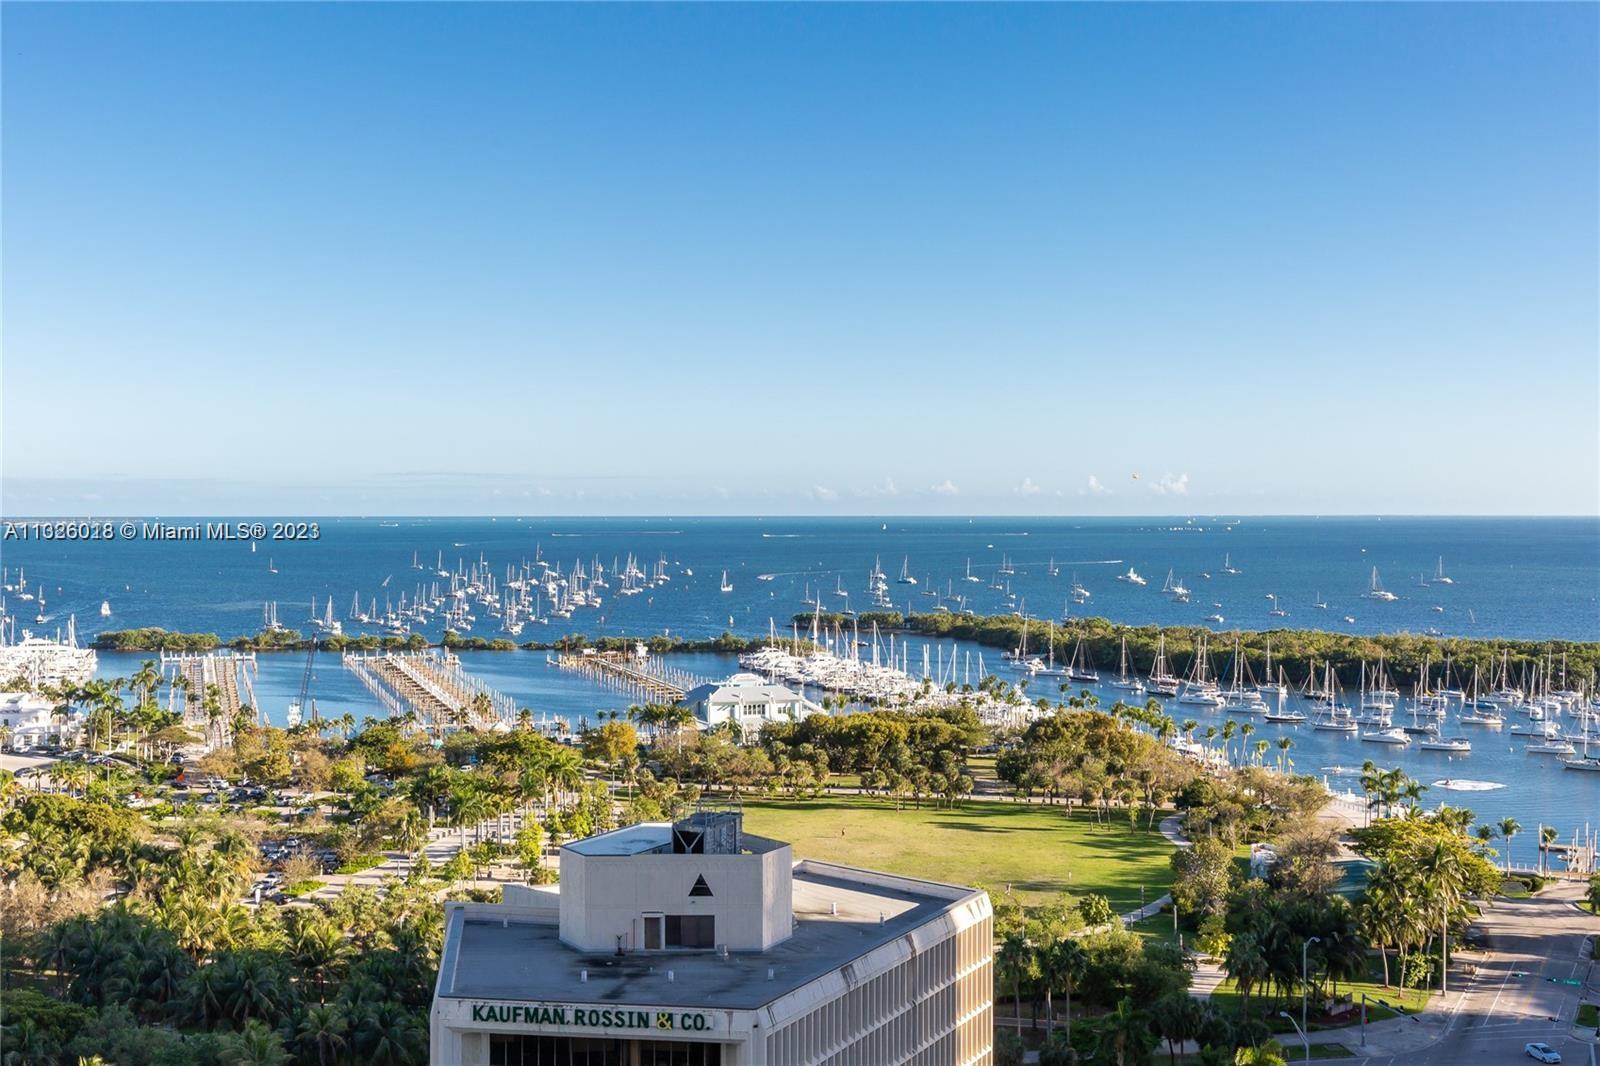 Ritz Coconut Grove's Finest!  3BR/3.5 BTH with spectacular sweeping east views of the bay plus southwest views of Coral Gables and beyond! Saturnia Marble floors throughout. The most desirable 3 bedroom split floor plan with a Master Bedroom that includes an enormous closet room. Walk to Fresh Market, Restaurants, Parks, Marina, Cocowalk and all the Village of Coconut Grove has to offer. Enjoy all Ritz amenities including New Hair Salon, Pool, Spa, Restaurant, Commodore Bar and Lounge. Don't miss this opportunity!